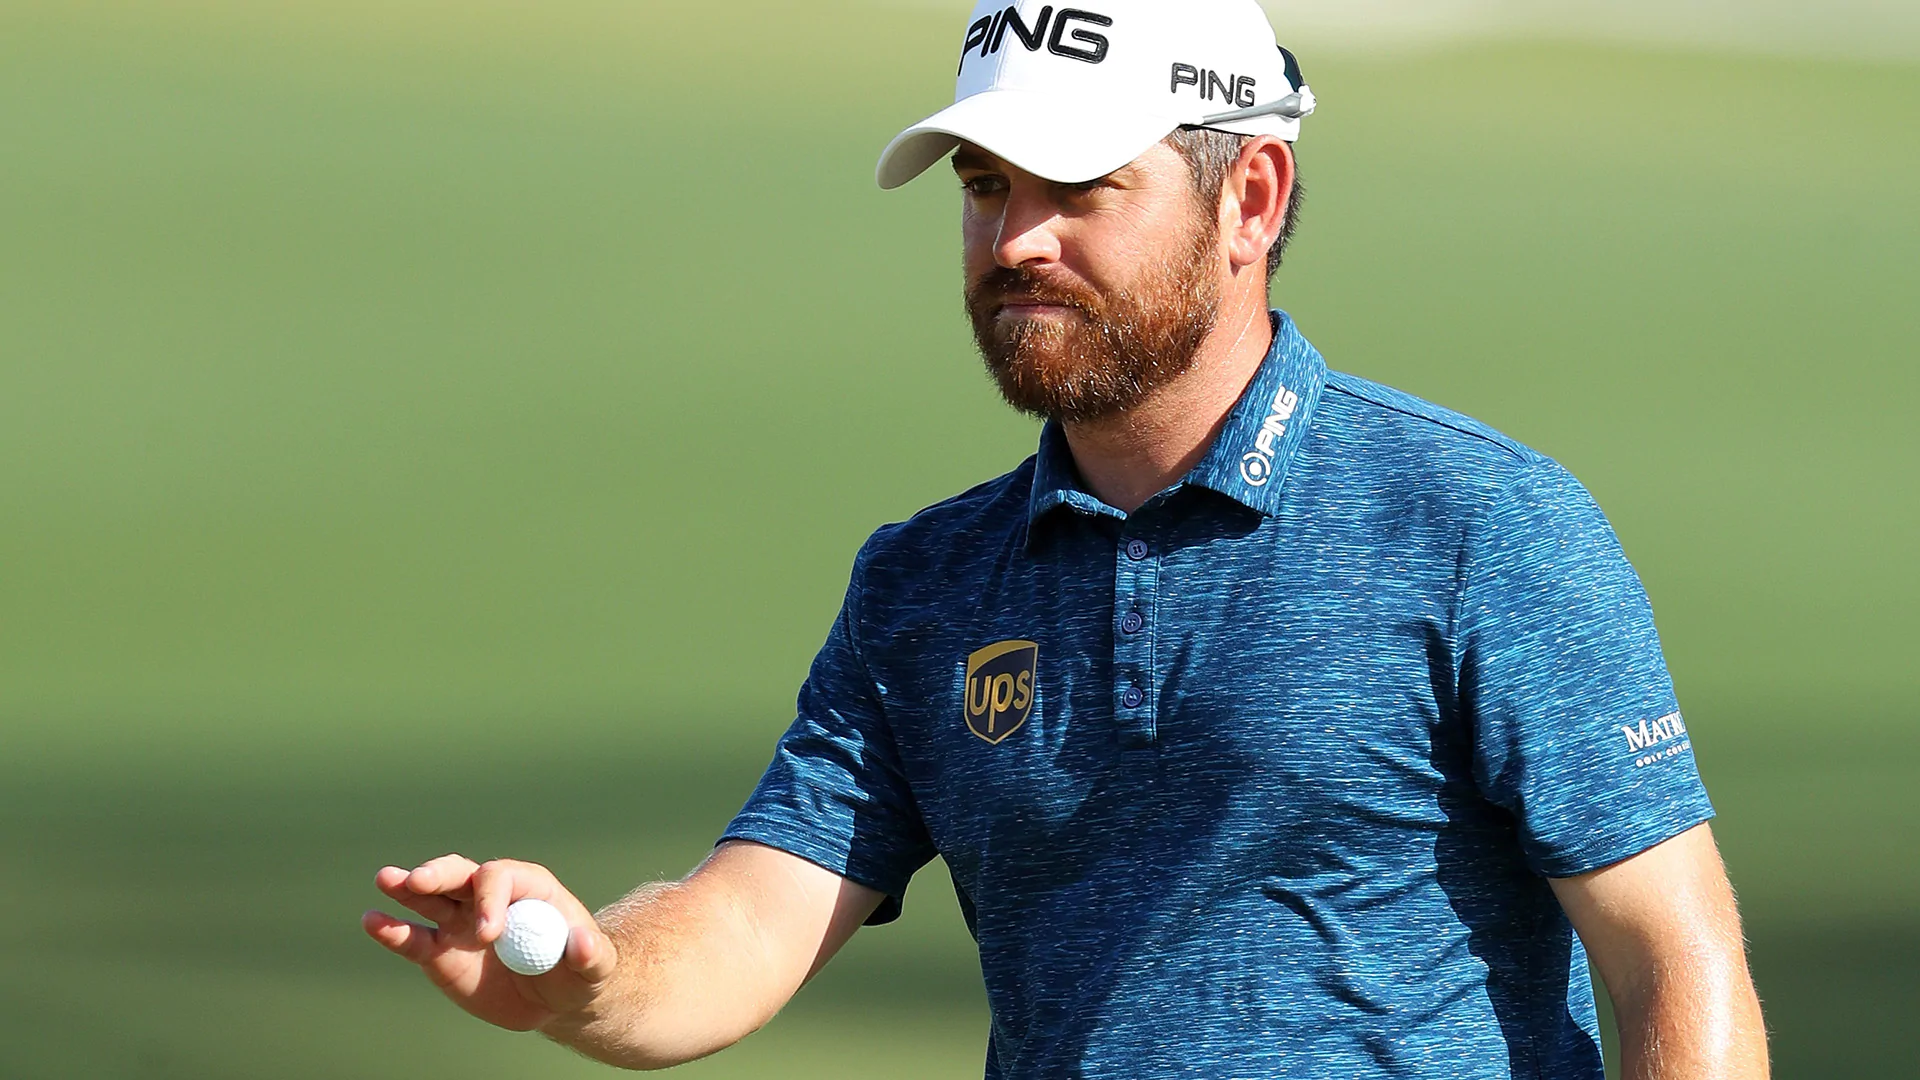 Oosthuizen WDs from Joburg after freak injury